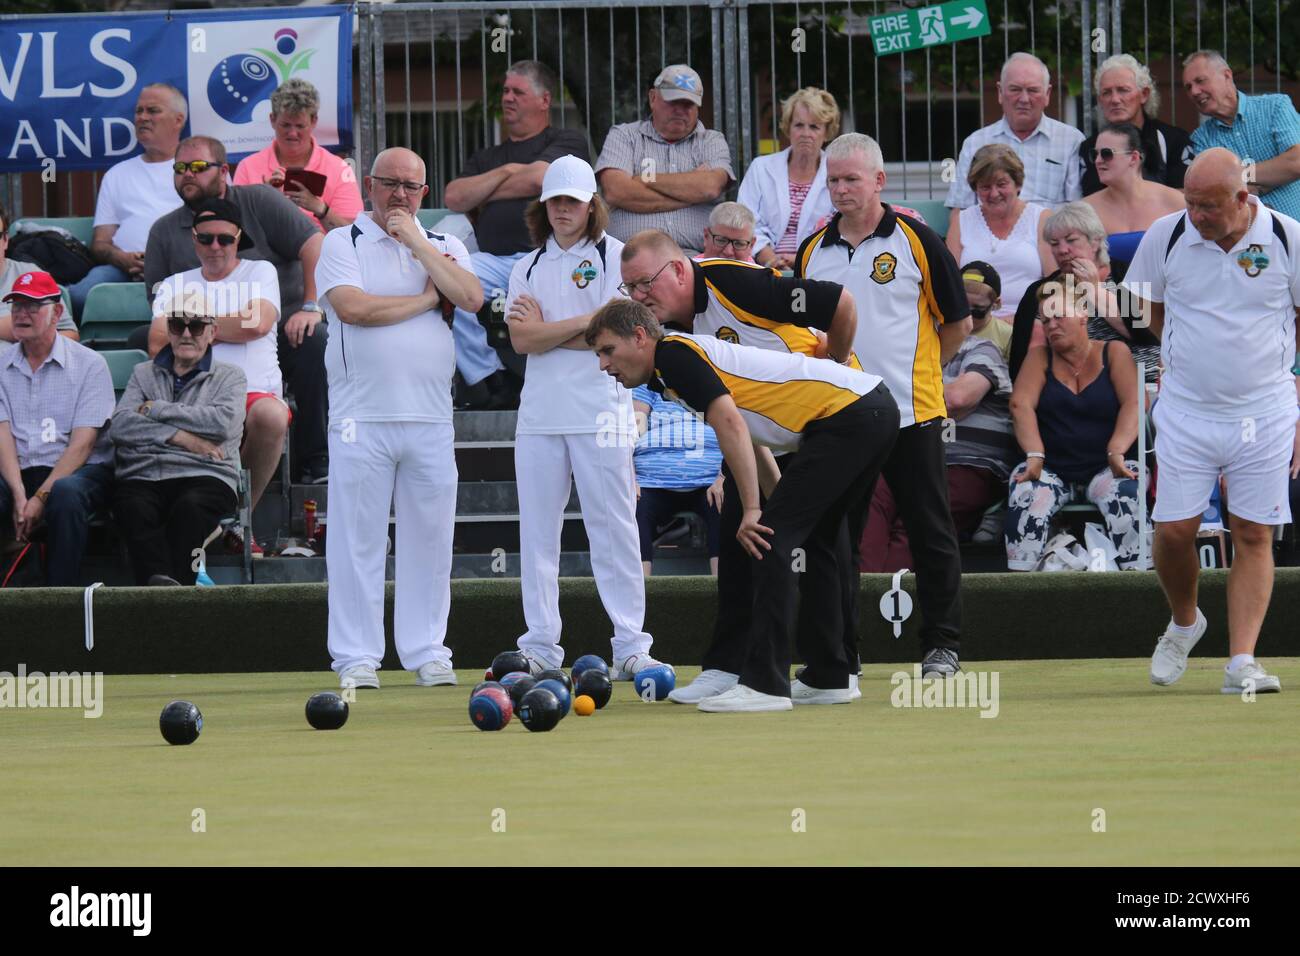 Ayr,Ayrshire, Scotland, UK 29 June 2019. The World Bowls Competiton at Northfield Ayr.The 2019 Bowls Scotland National Championships too place at the National Centre for Bowling at Northfield in Ayr from Monday 22nd to Saturday 27th July. Bowls, or lawn bowls, is a sport in which the objective is to roll biased balls so that they stop close to a smaller ball called a 'jack' or 'kitty'. It is played on a bowling green, which may be flat or convex or uneven. Stock Photo